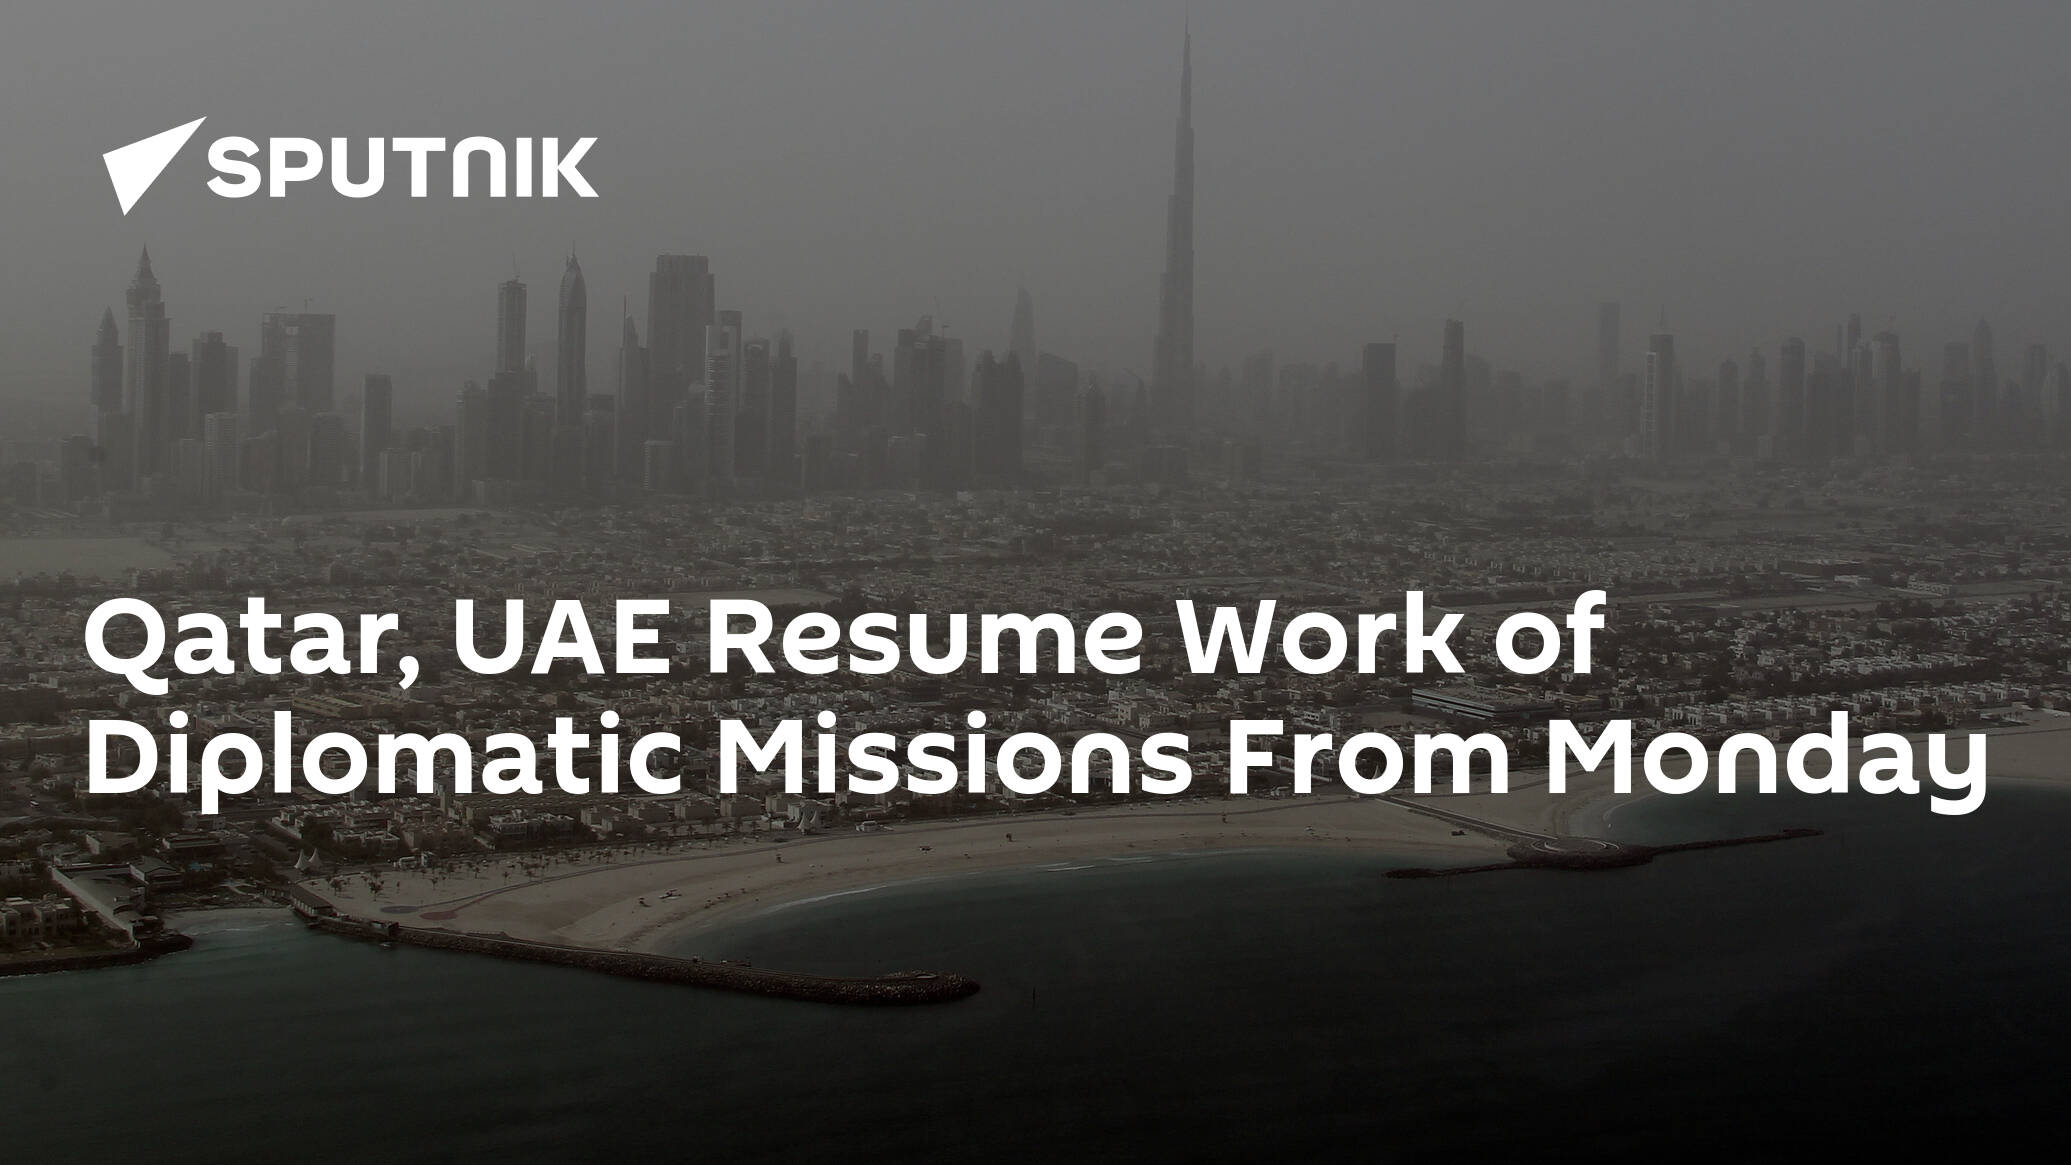 Qatar, UAE Resume Work of Diplomatic Missions From Monday